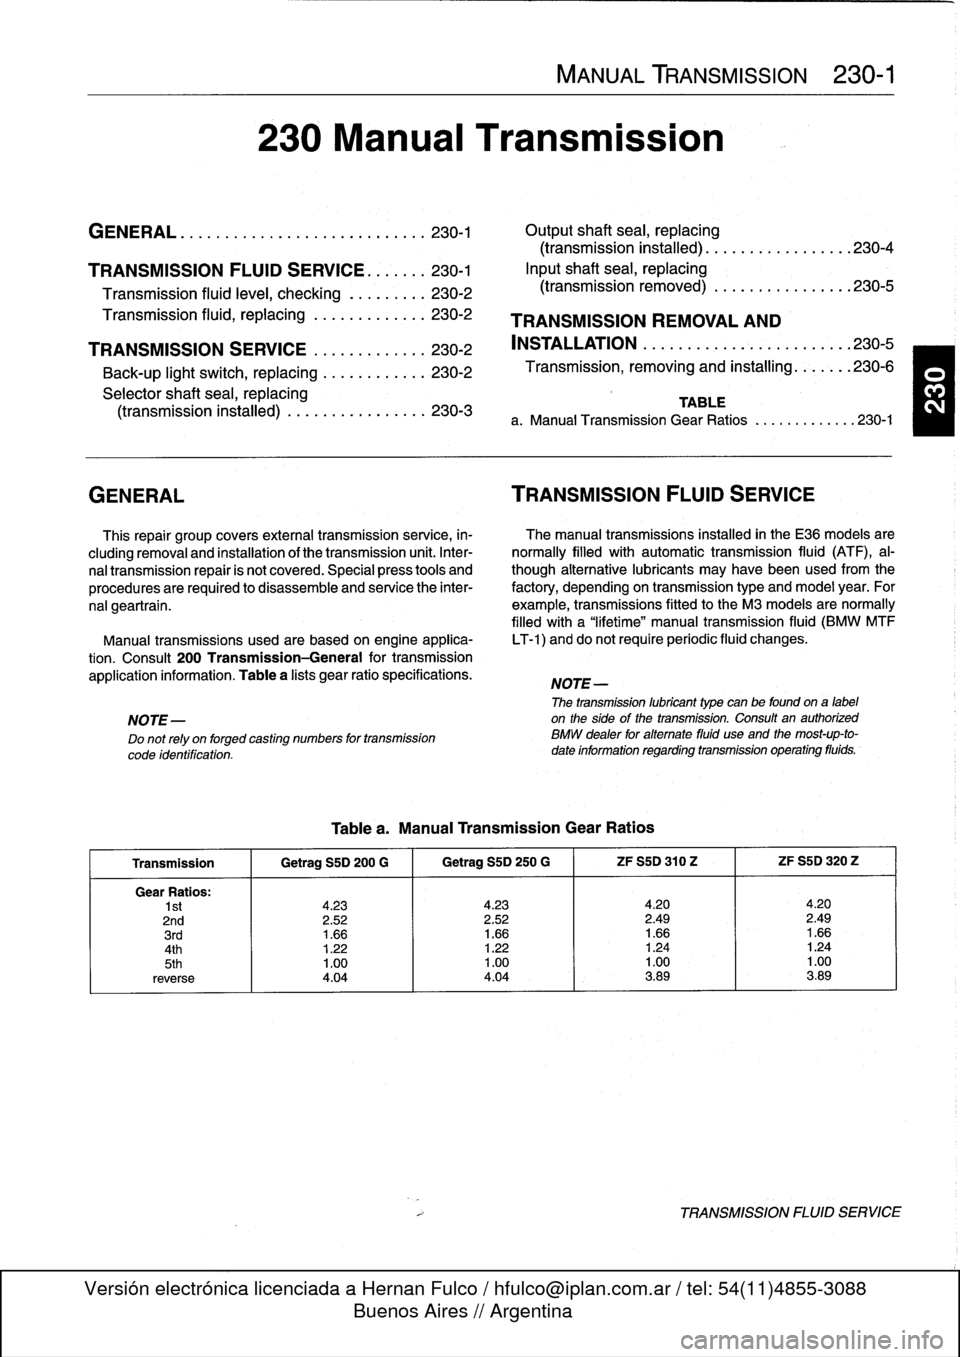 BMW 325i 1993 E36 Owners Guide 
230
Manual
Transmission

MANUAL
TRANSMISSION

	

230-1

GENERAL
...
.
............
.
.......
.
.
.
.
230-1

	

Output
shaft
sea¡,
replacing

(transmission
installed)
....
.
.....
.
.....
.230-4

TRA